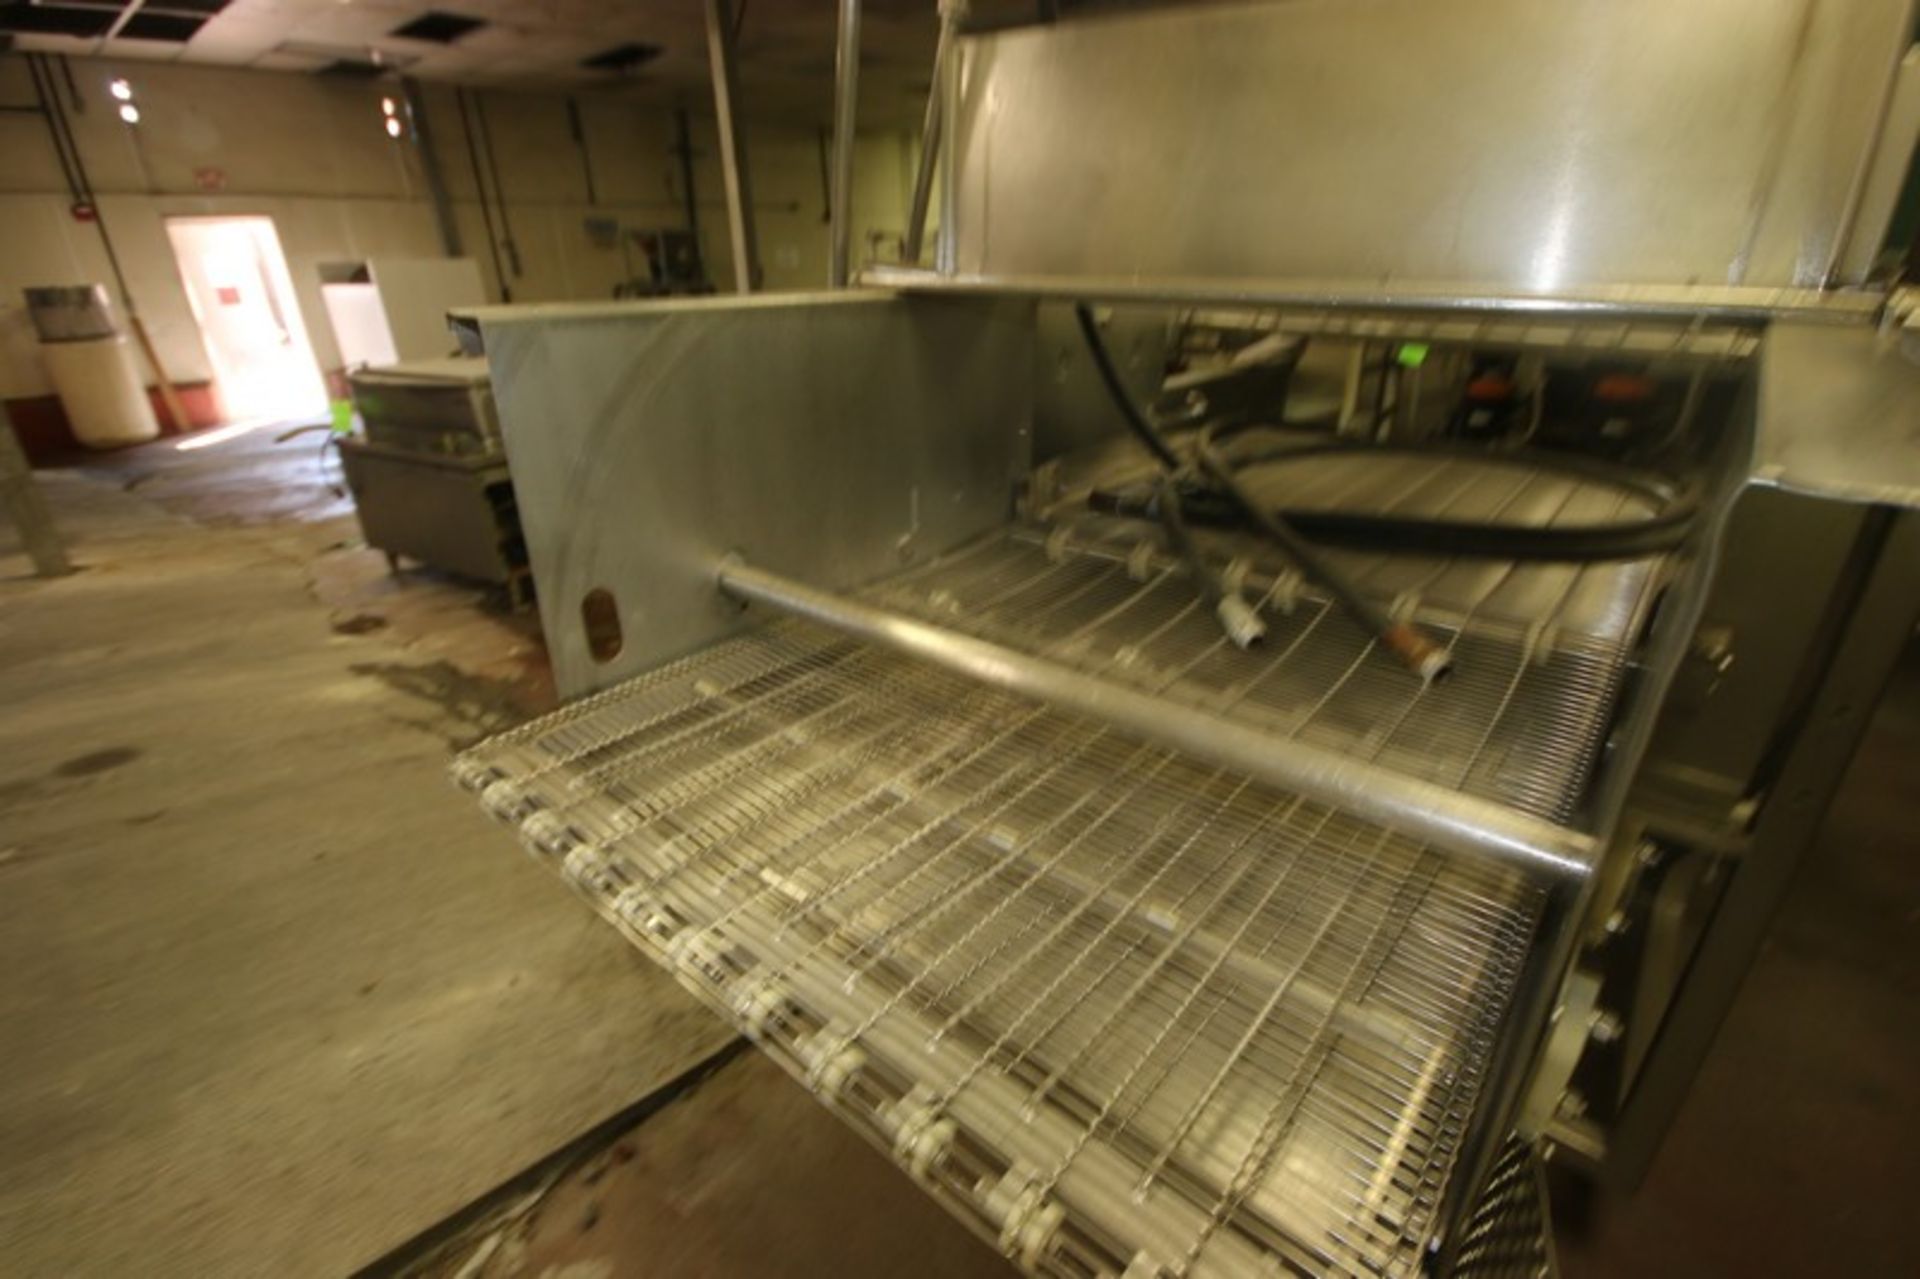 Stein S/S Breader, M/N XL-34, S/N 637, with Aprox. 34" W S/S Mesh Conveyor, with 15 hp - Image 5 of 11